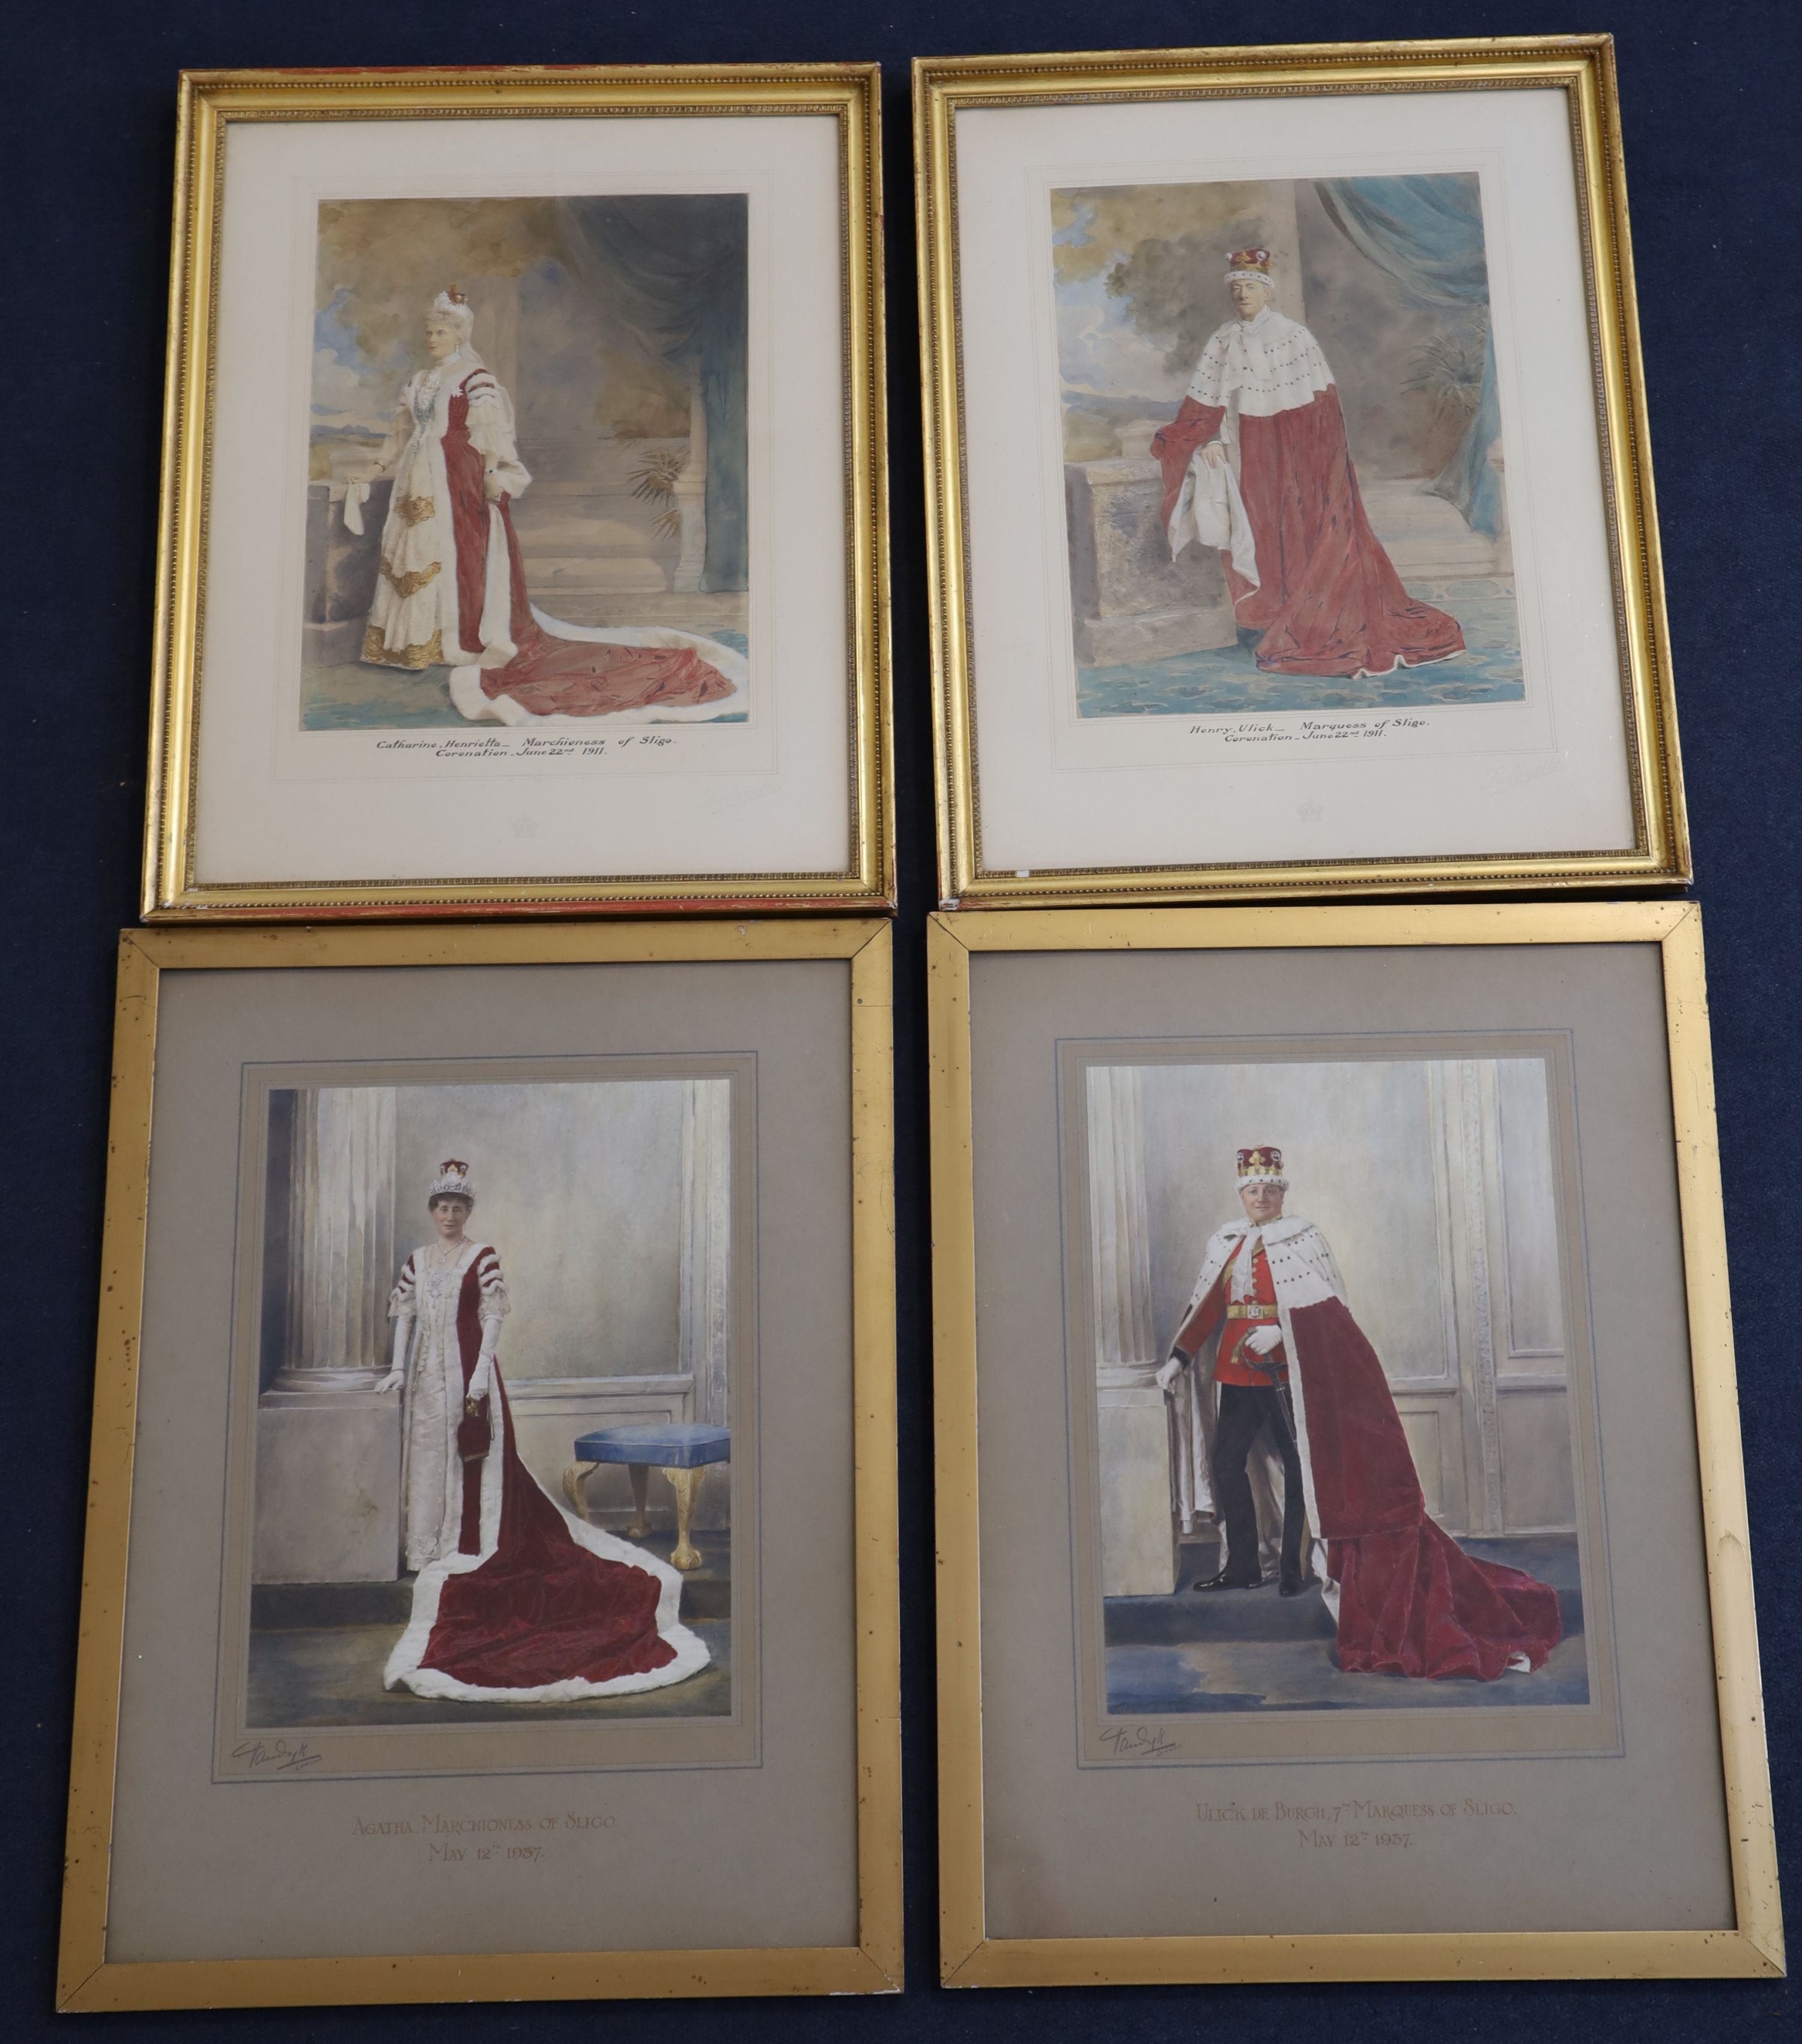 Two pairs of hand tinted photographs of Henry Ulick de Burgh, 7th Marquess of Sligo and Agatha, Marchioness of Sligo, largest overall 5